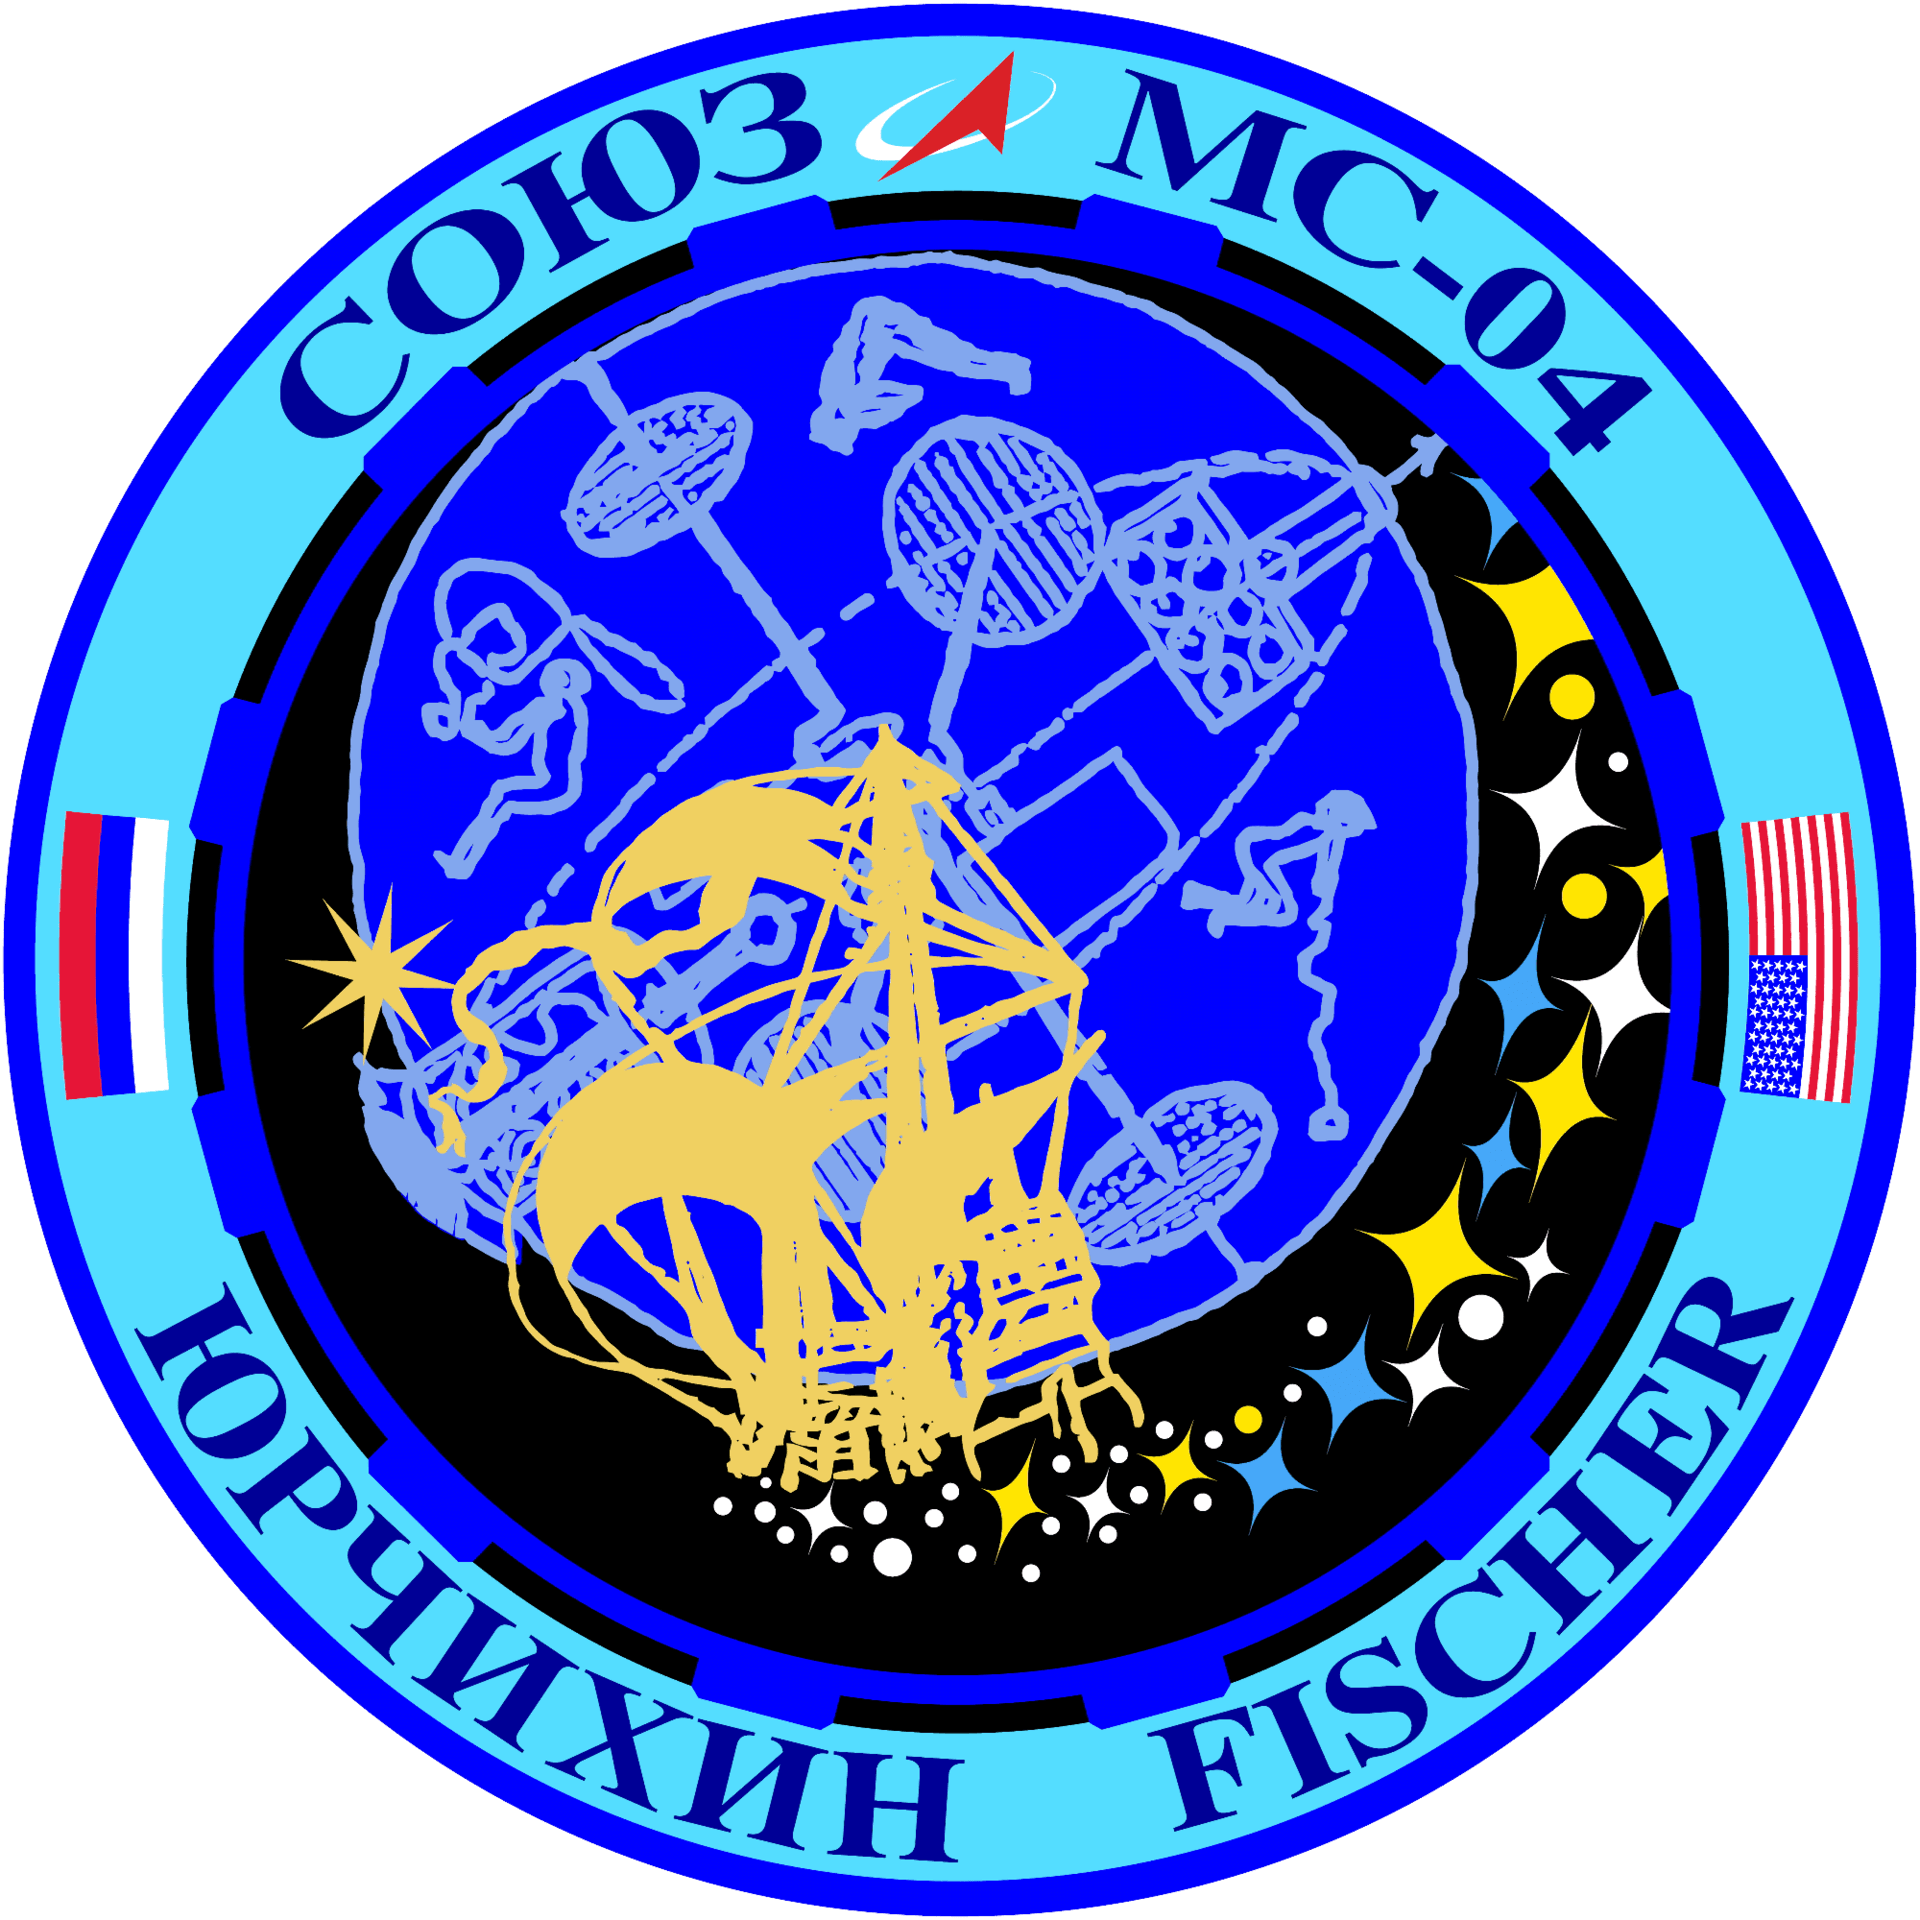 Mission patch for Soyuz MS-04